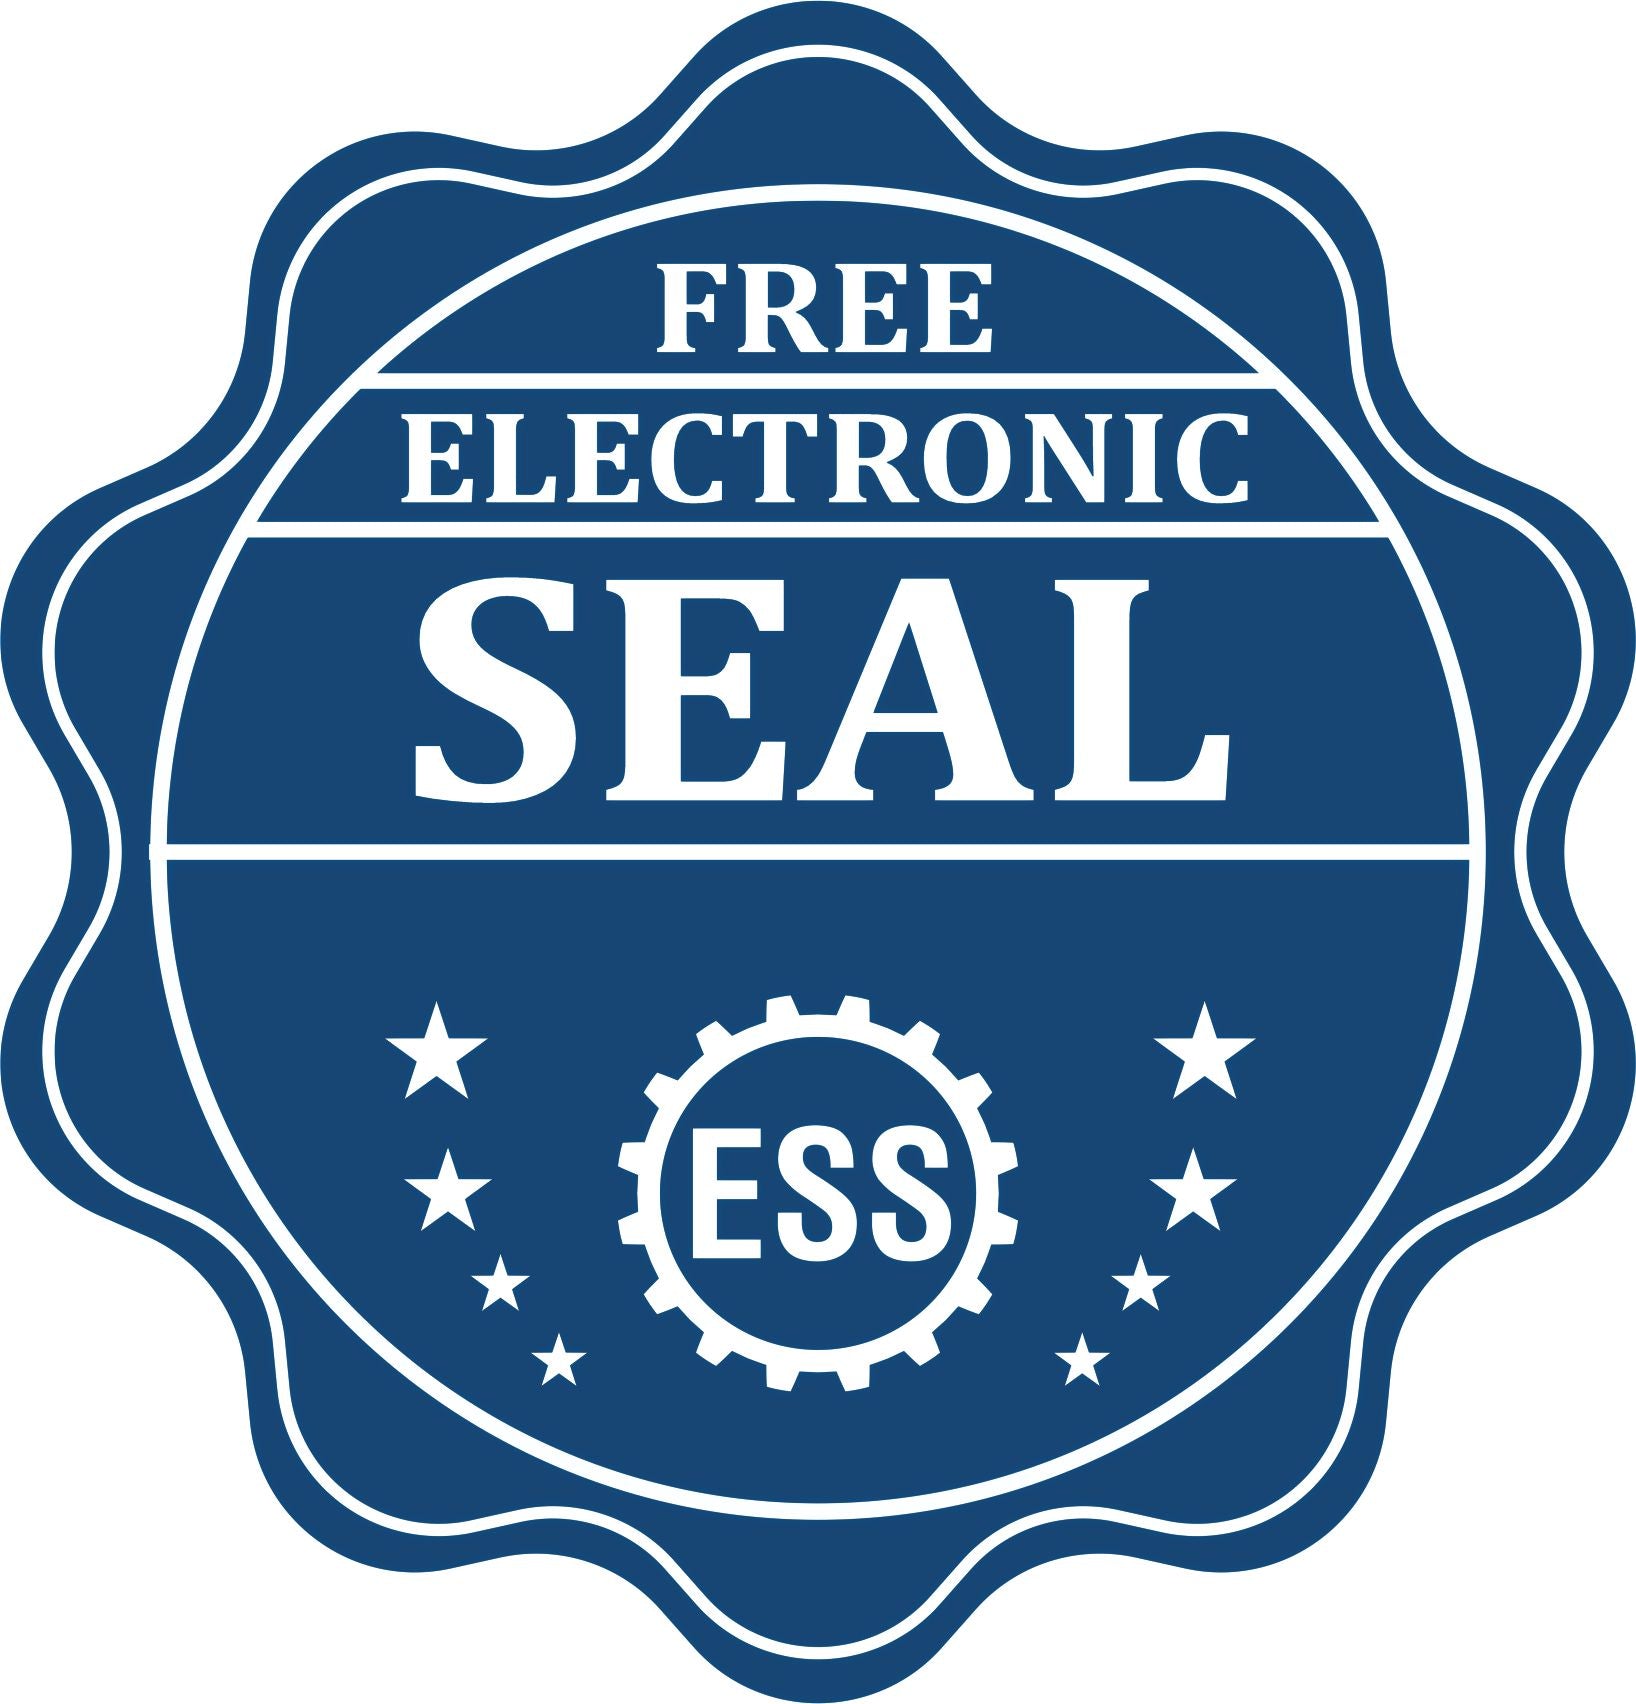 A badge showing a free electronic seal for the Gift New Jersey Architect Seal with stars and the ESS gear on the emblem.